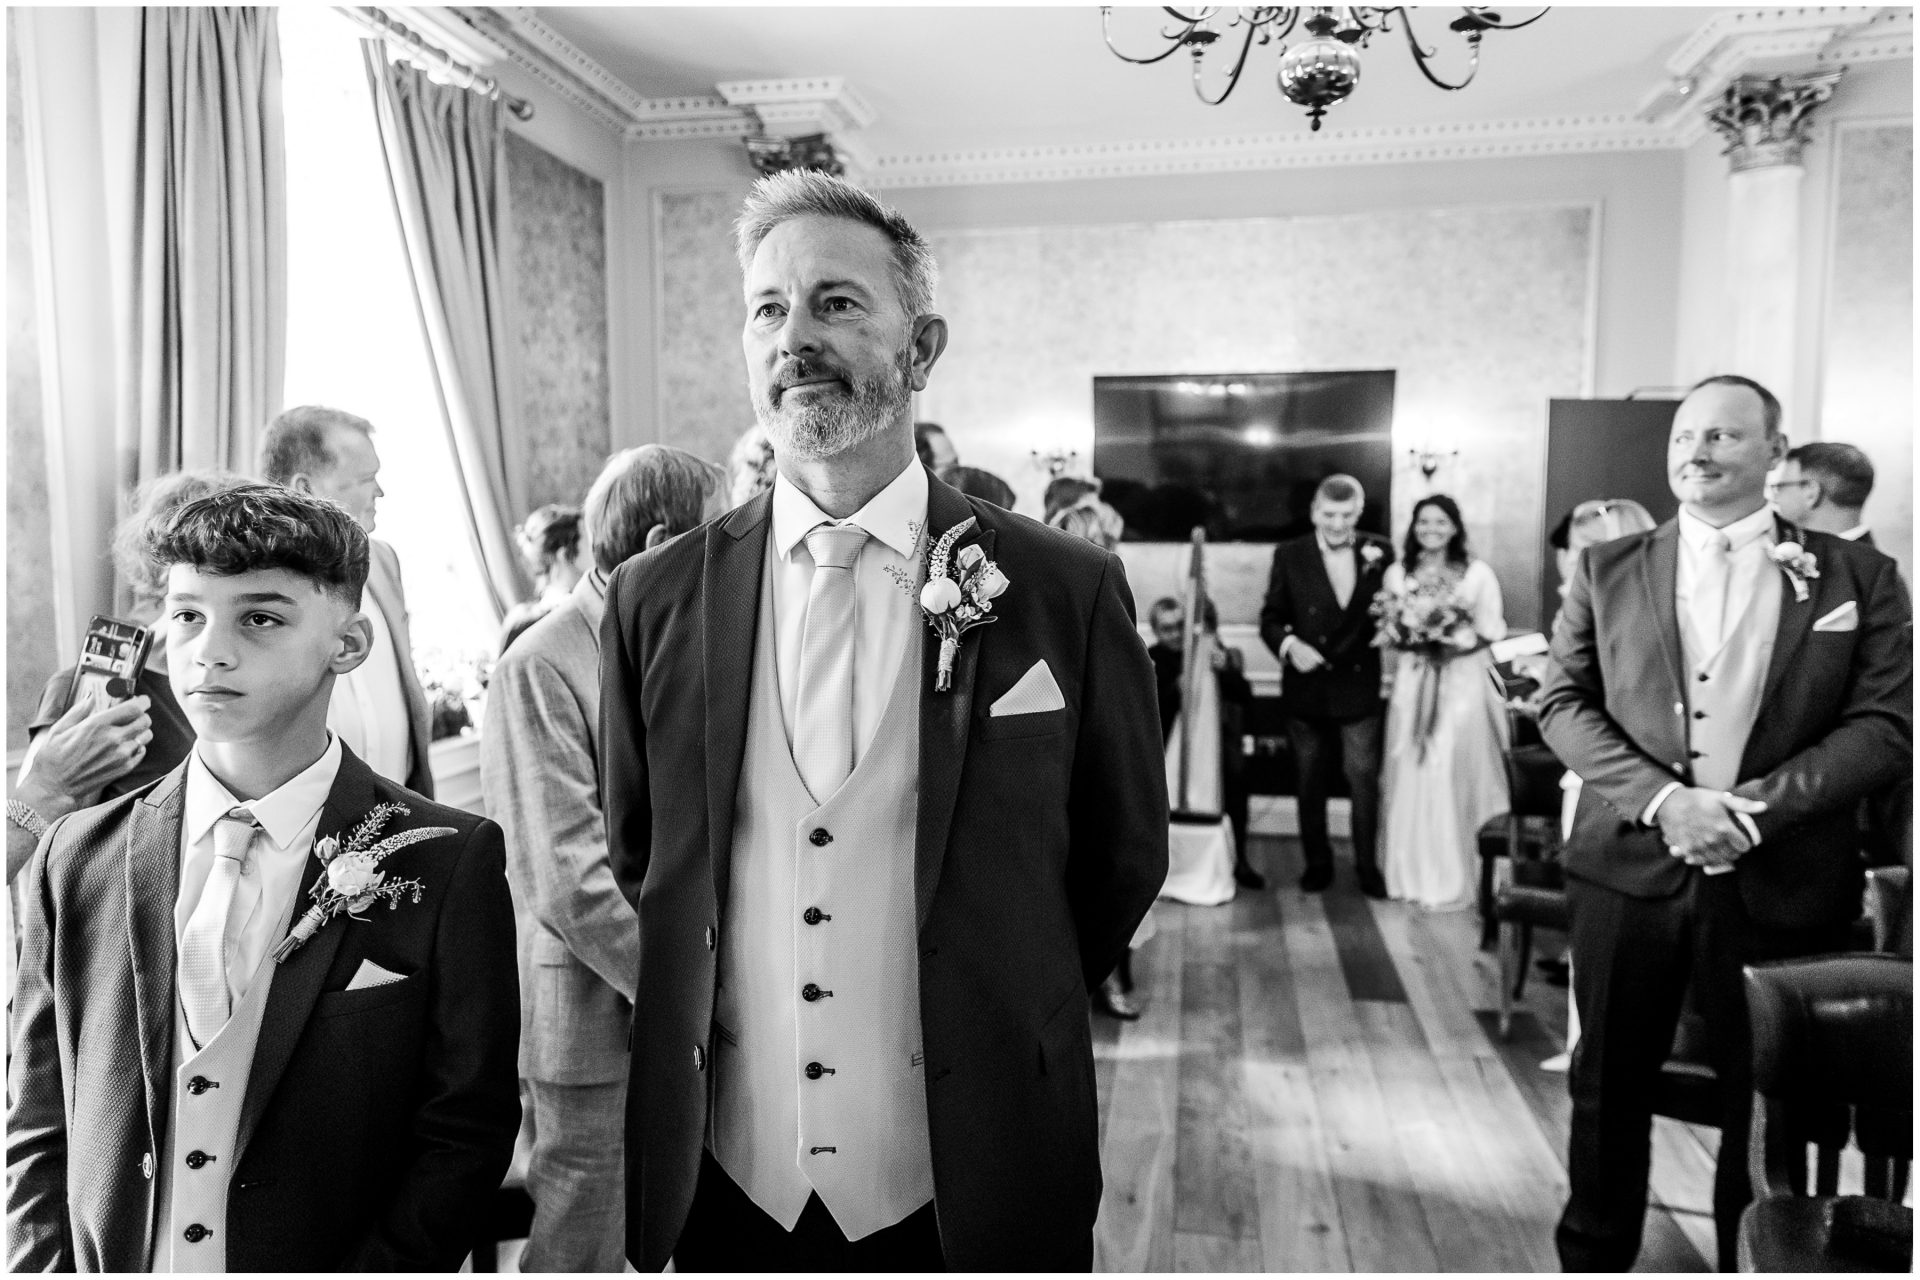 The groom stands at the front of the hotel's ceremony room as the bride walks down the aisle on her father's arm